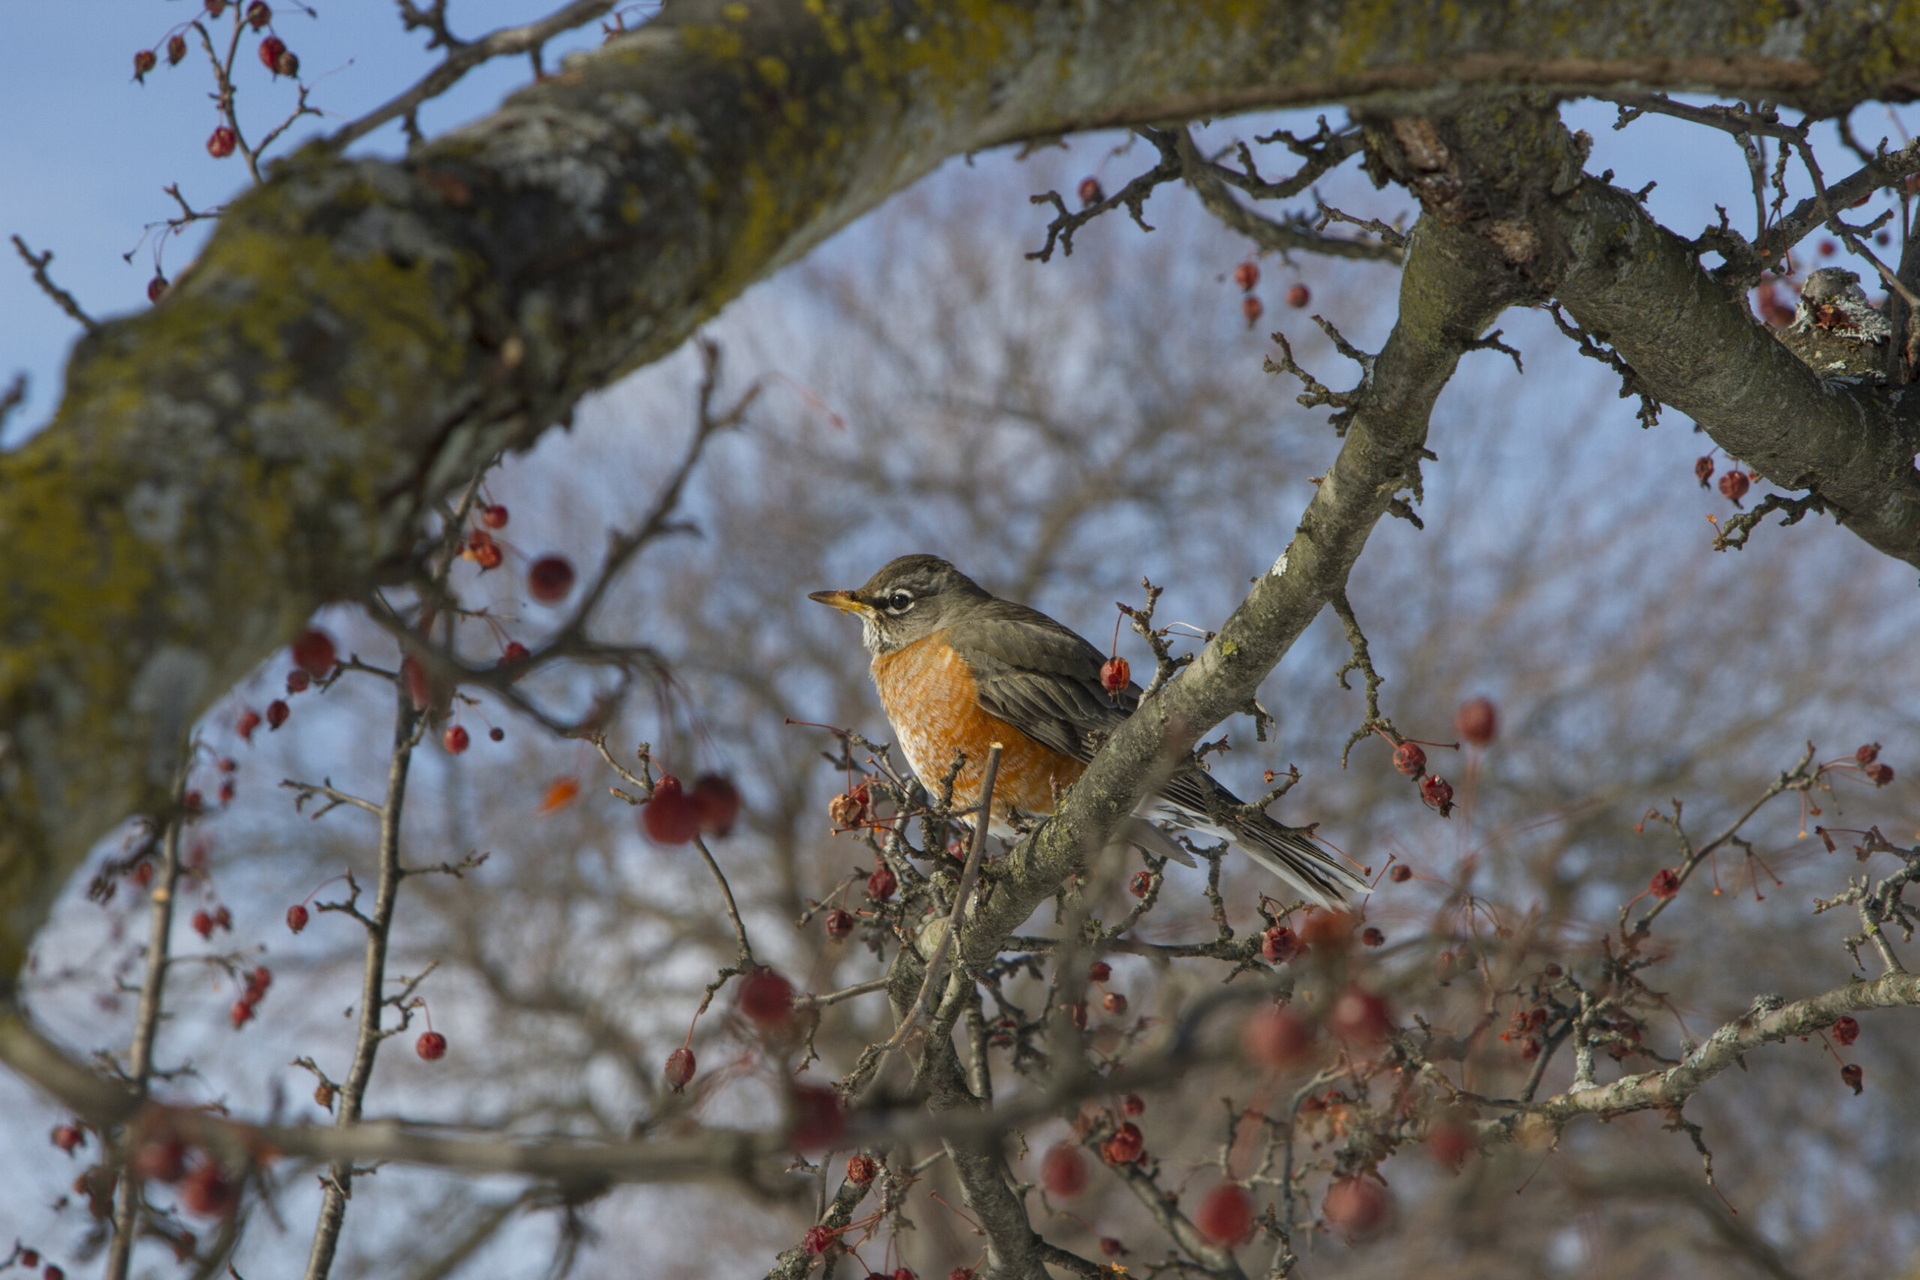 A robin sitting in a tree with red berries in winter.